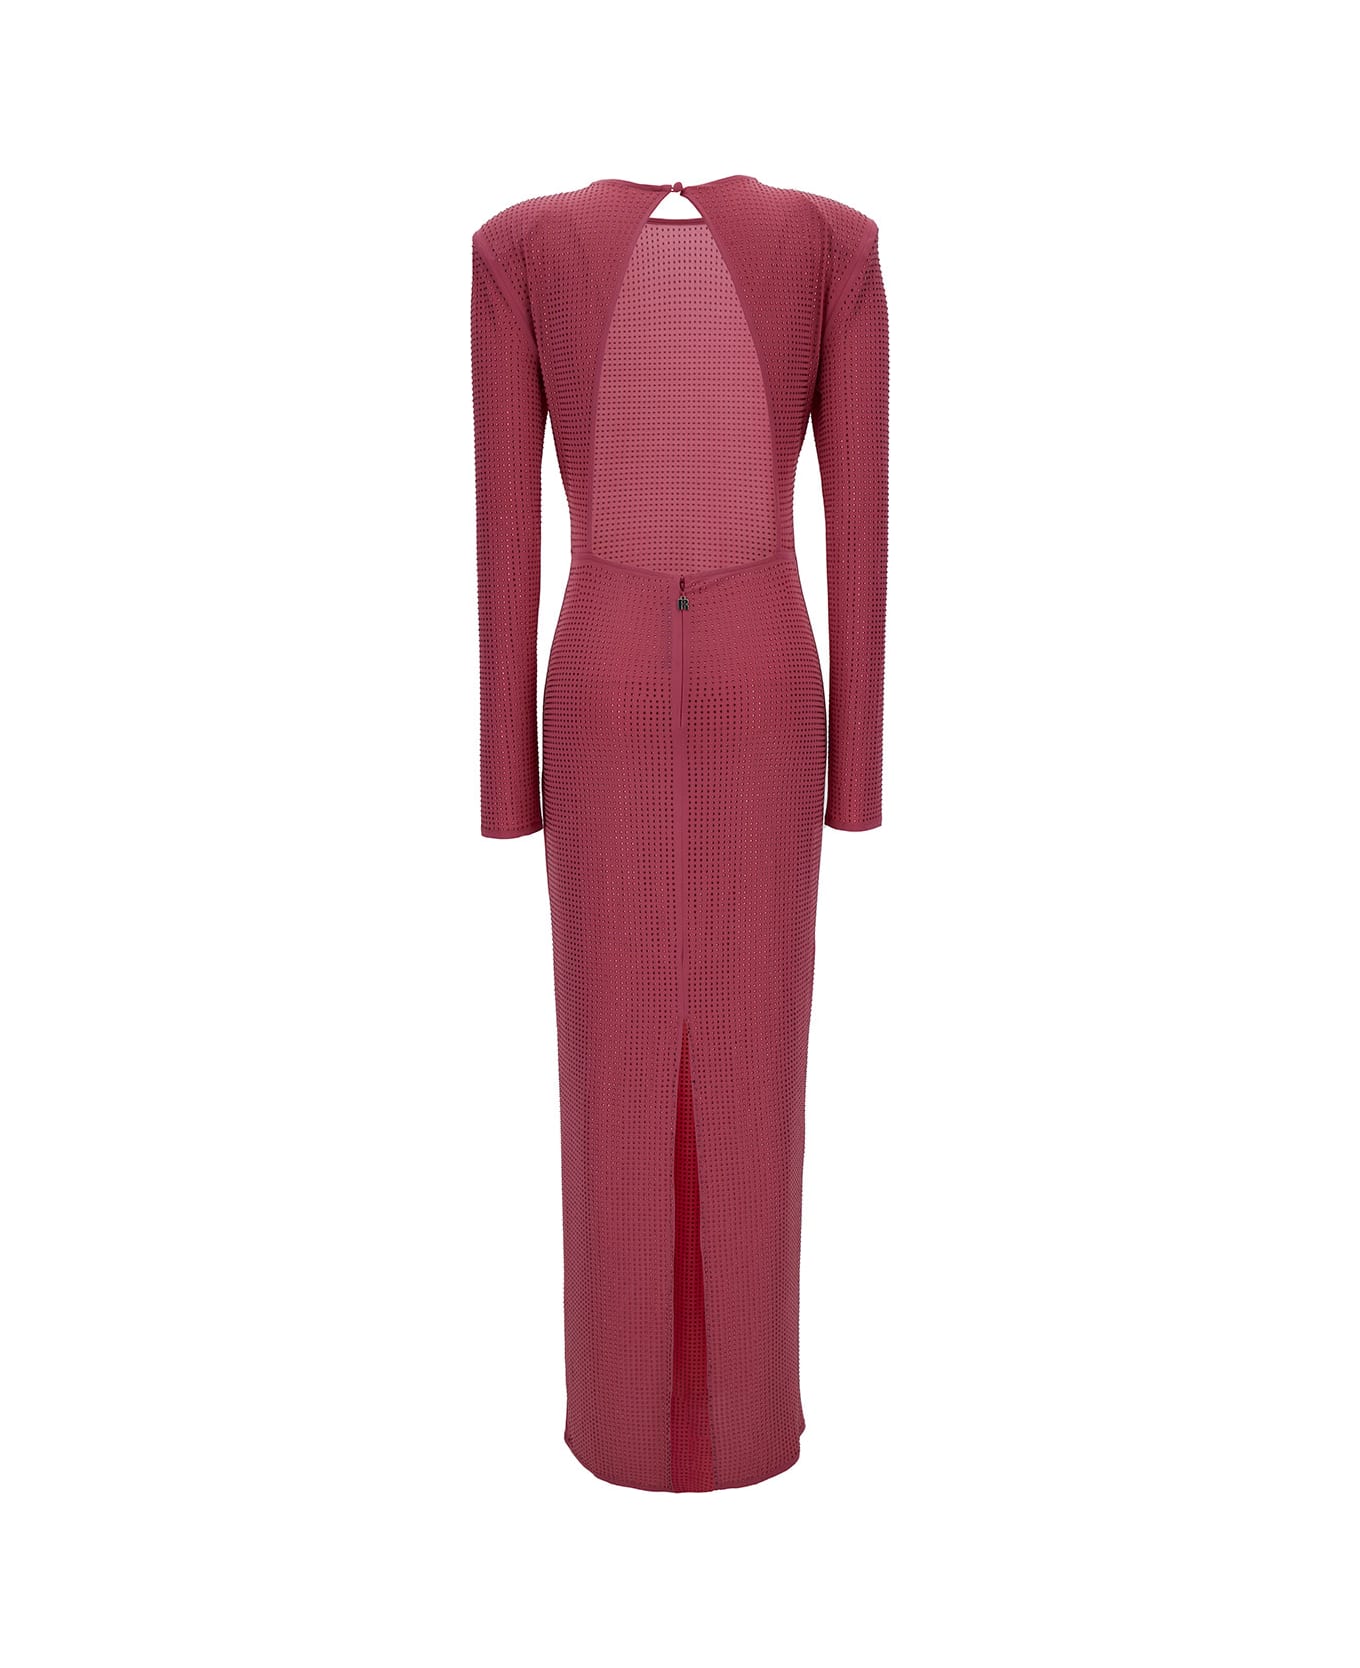 Rotate by Birger Christensen Red Maxi Dress With Rhinestone Embellishment In Stretch Fabric Woman - Rosa